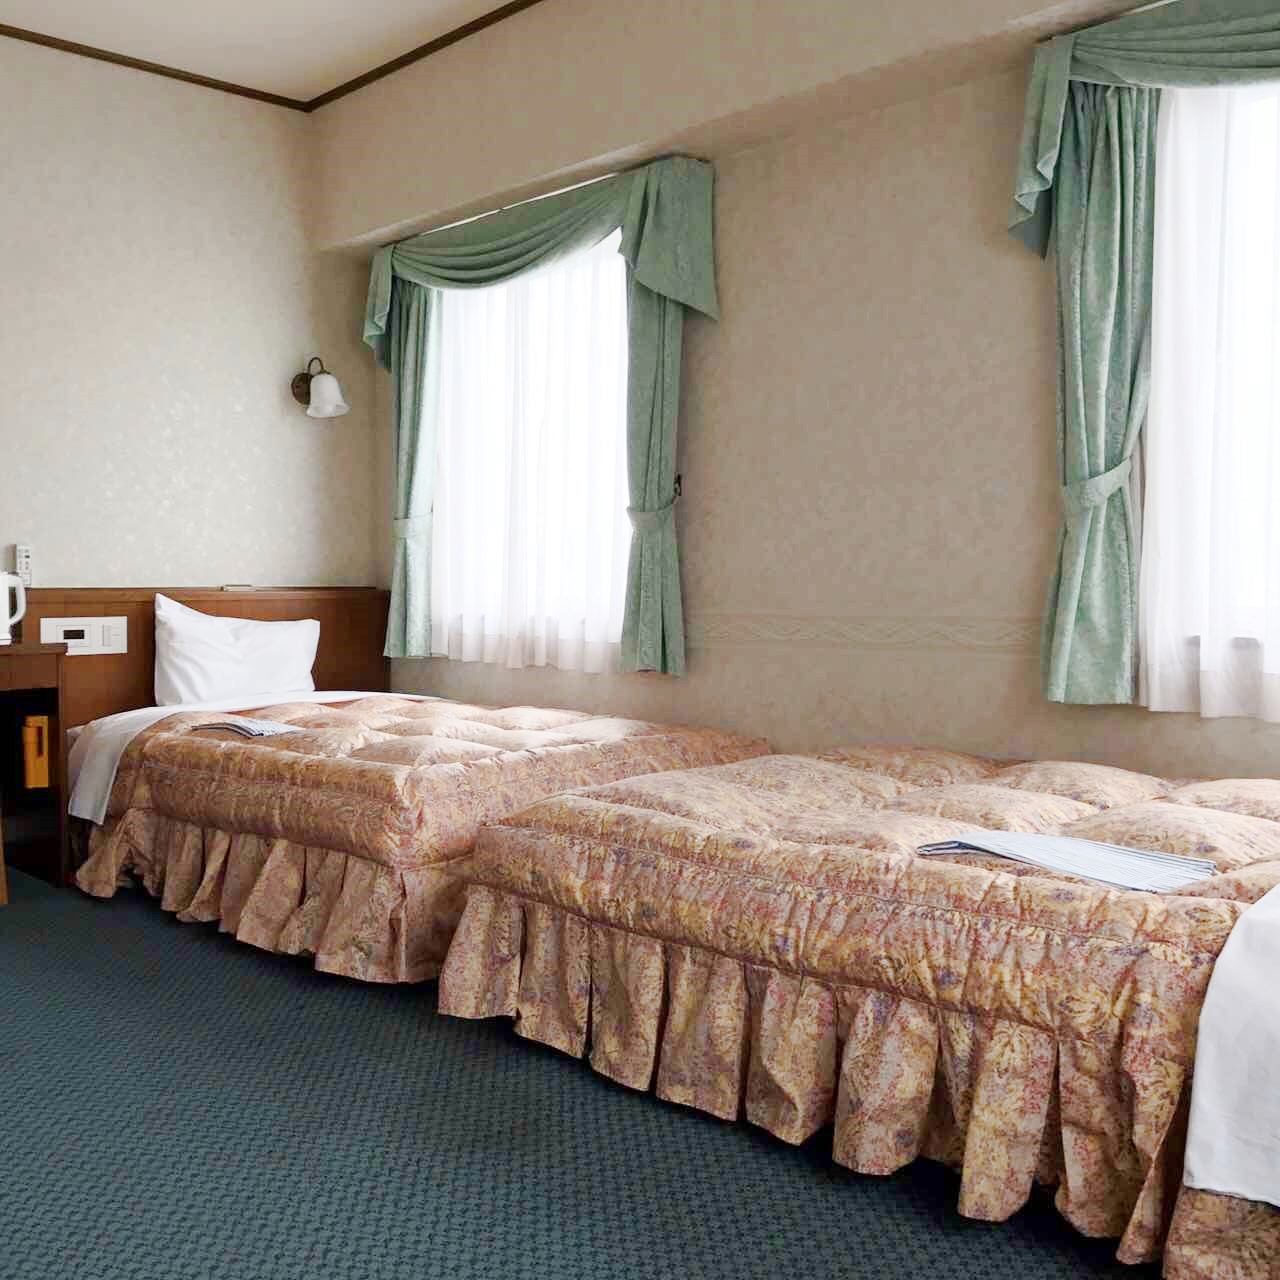 Hotel River Inn Hotel River Inn is a popular choice amongst travelers in Nagaoka, whether exploring or just passing through. The property offers a wide range of amenities and perks to ensure you have a great time. Fa